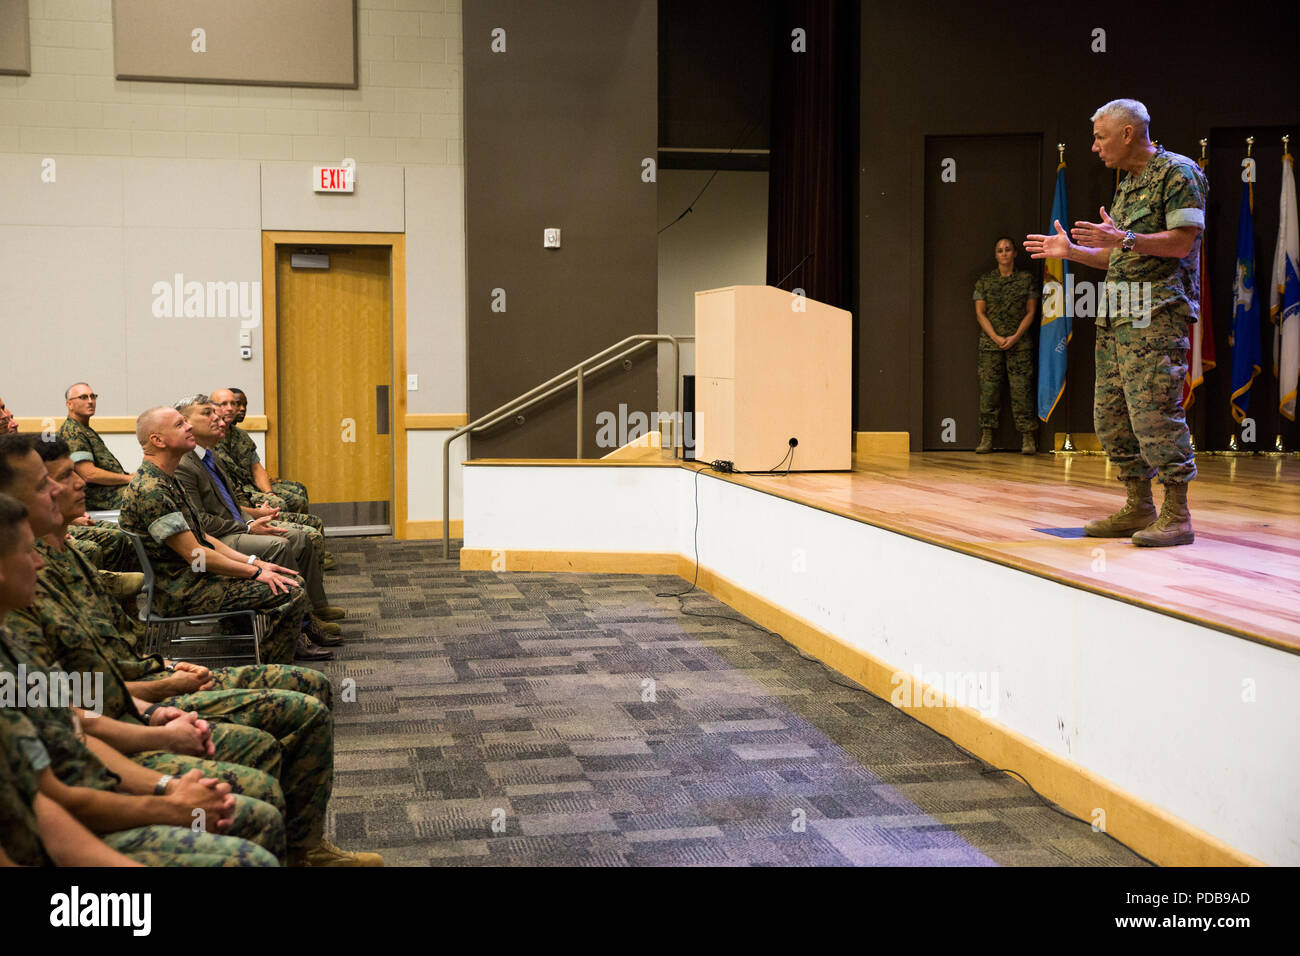 Lt. Gen. Rex. C. McMillian, commander of Marine Forces Reserve and Marine Forces North, addresses Maj. Gen. Michael F. Fahey, outgoing commander of Force Headquarters Group, during the change of command ceremony at the Federal City Auditorium, New Orleans, Aug. 3, 2018. While addressing the attendees, McMillian expressed his gratitude for all the hard work and dedication Fahey gave to FHG during his time as the commander from 2016-2018. (U.S. Marine Corps photo by Sgt. Melissa Martens) Stock Photo